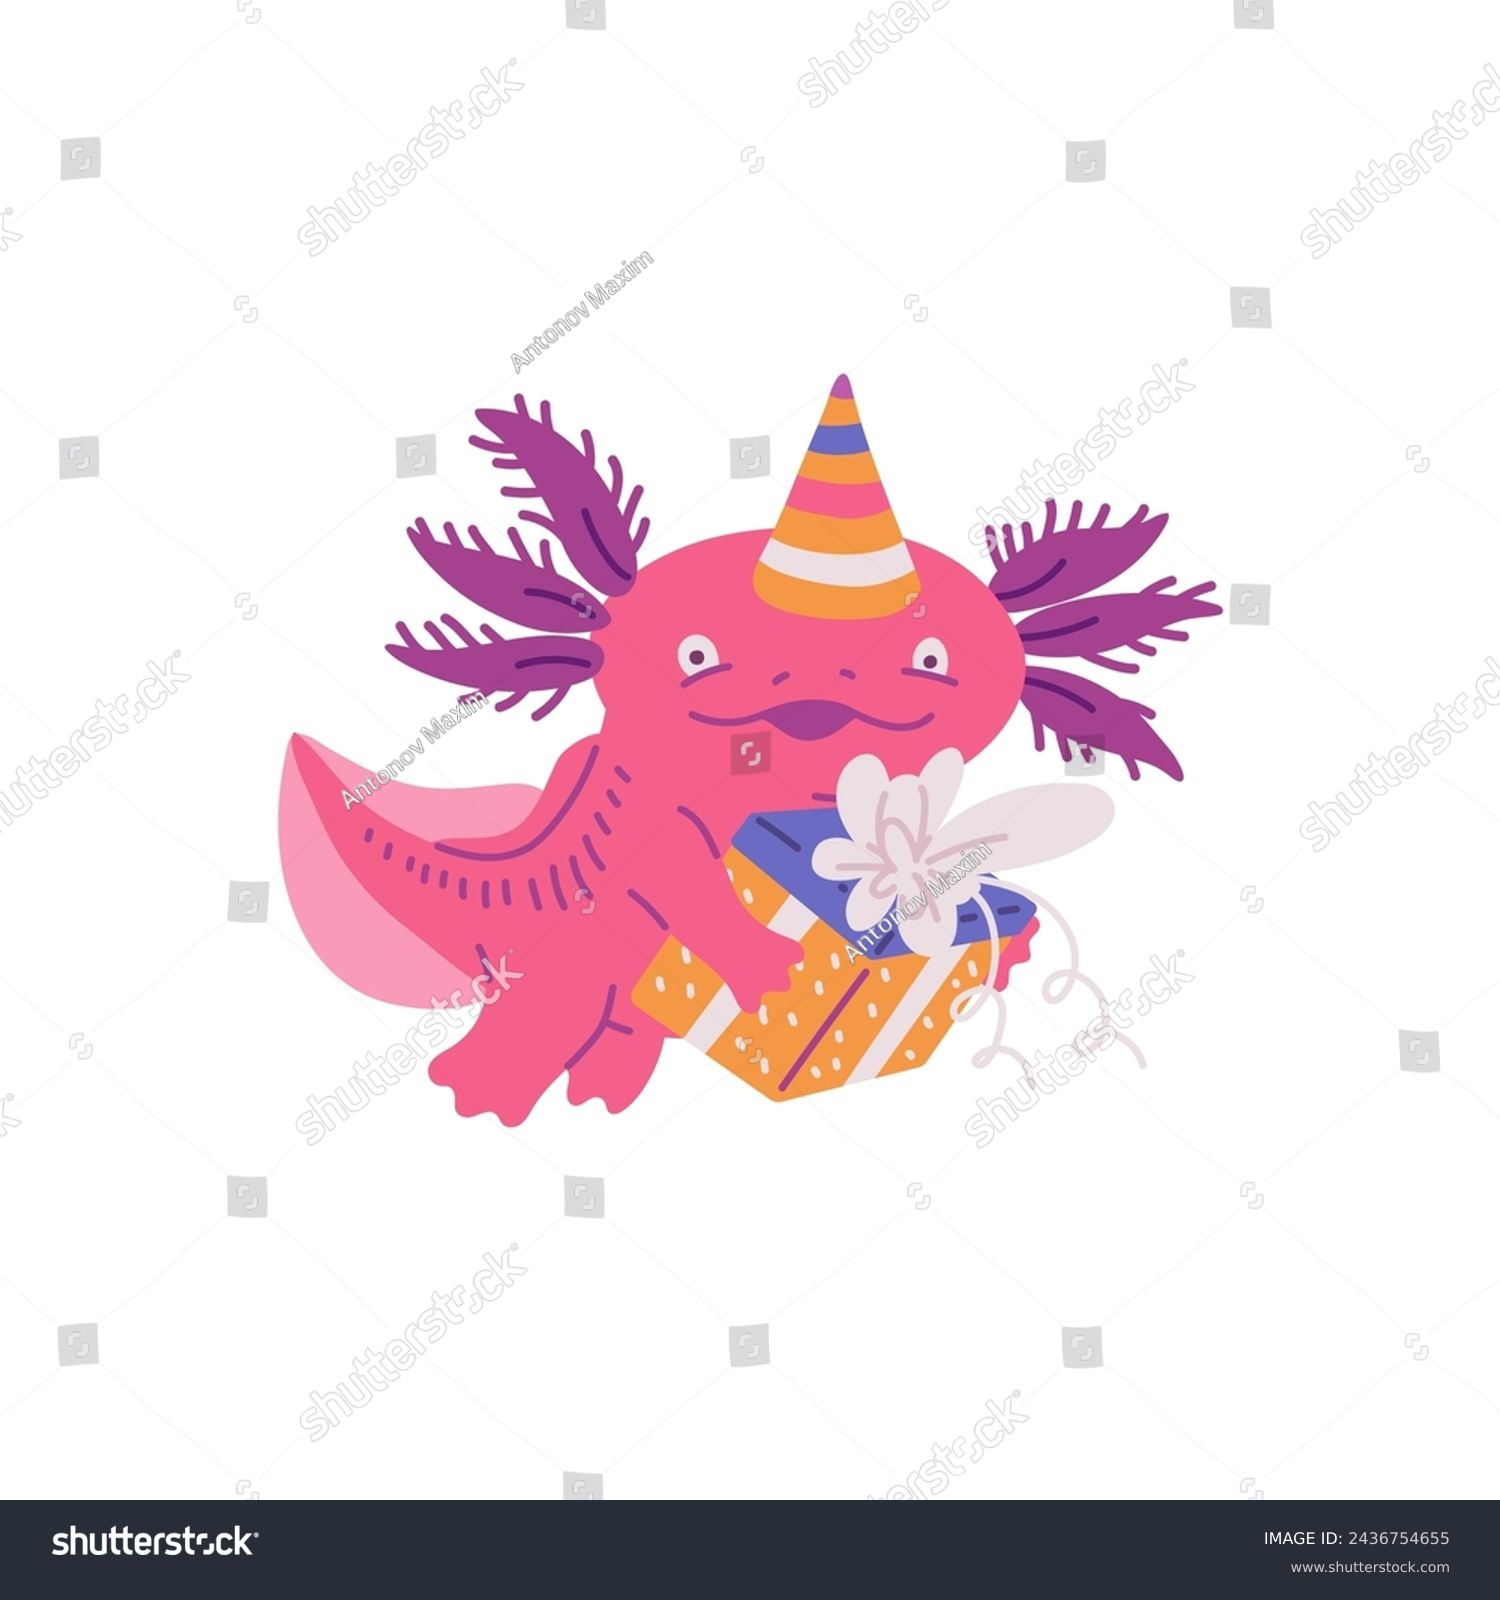 SVG of Funny axolotl amphibia animal character with birthday gifts. Cute axolotl aquatic salamander for birthday card, flat vector illustration isolated on white background. svg